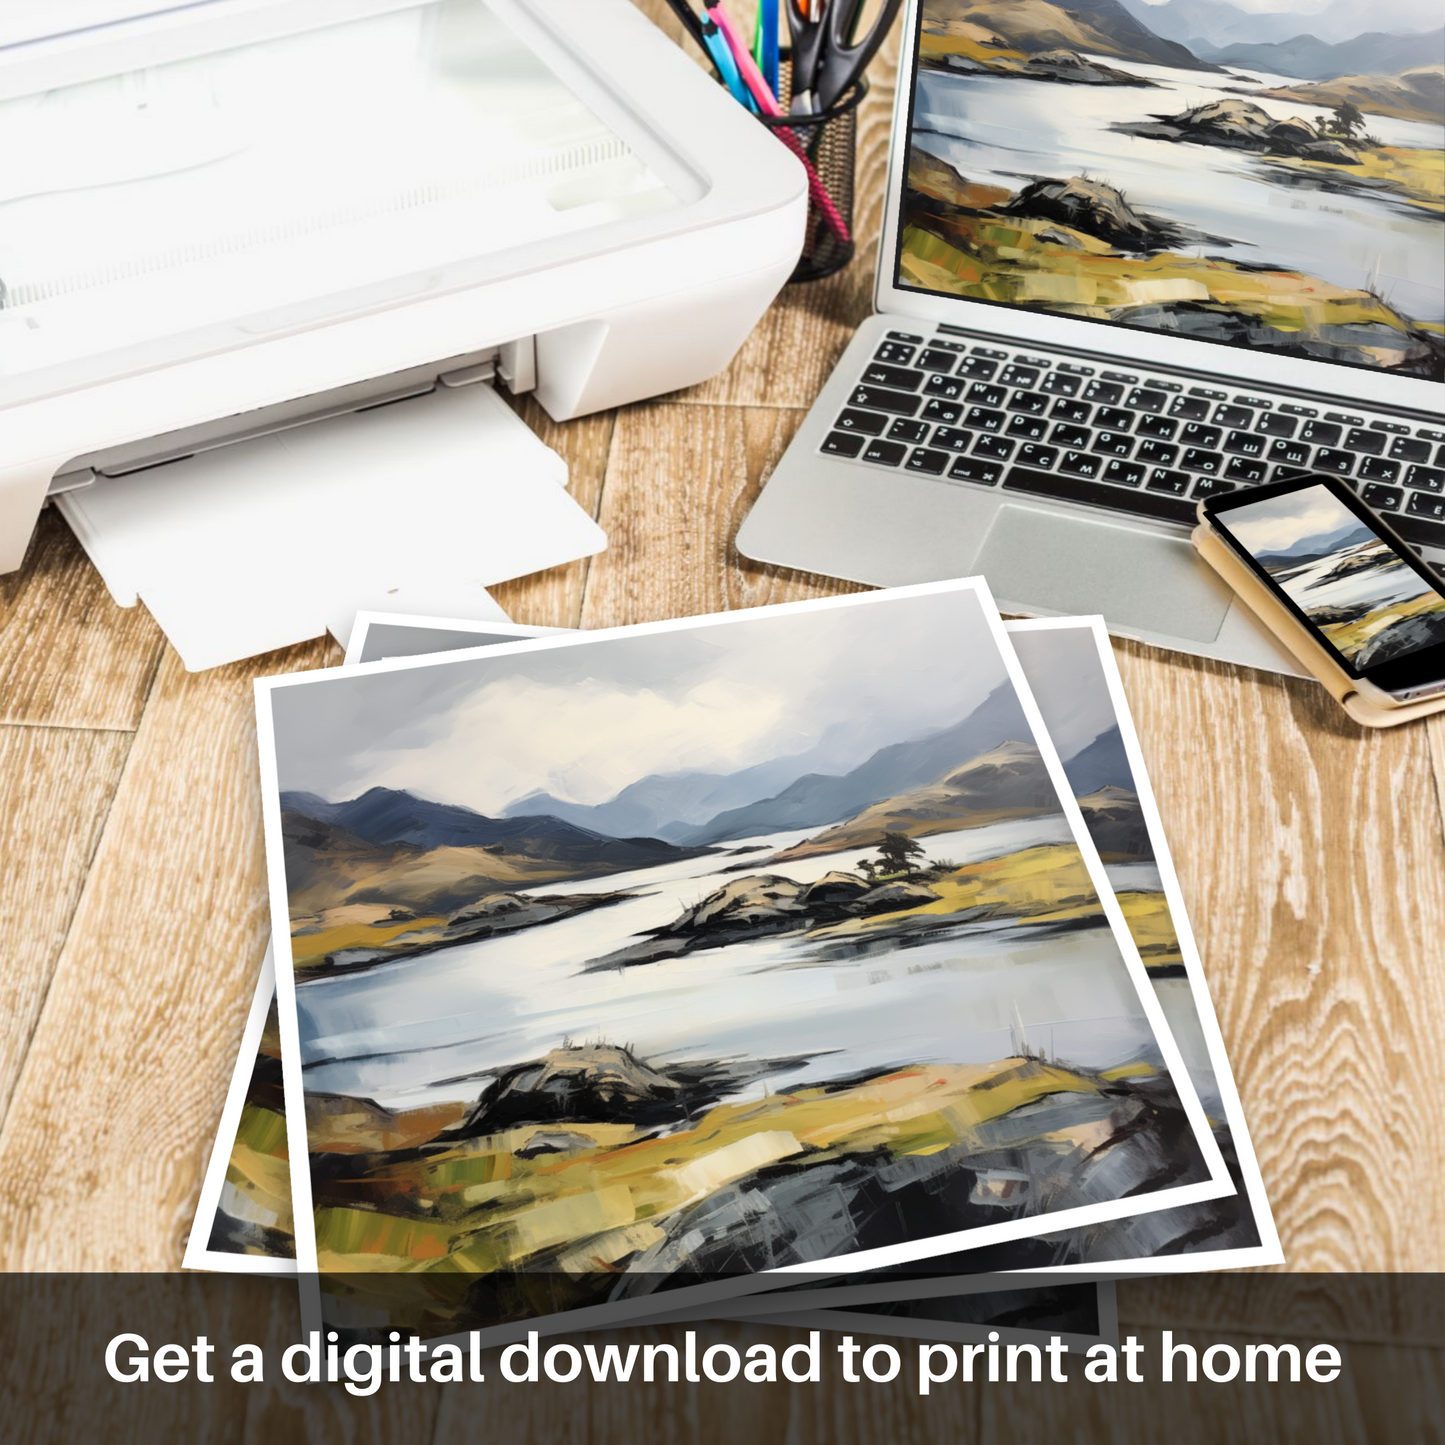 Downloadable and printable picture of Loch Morar, Highlands